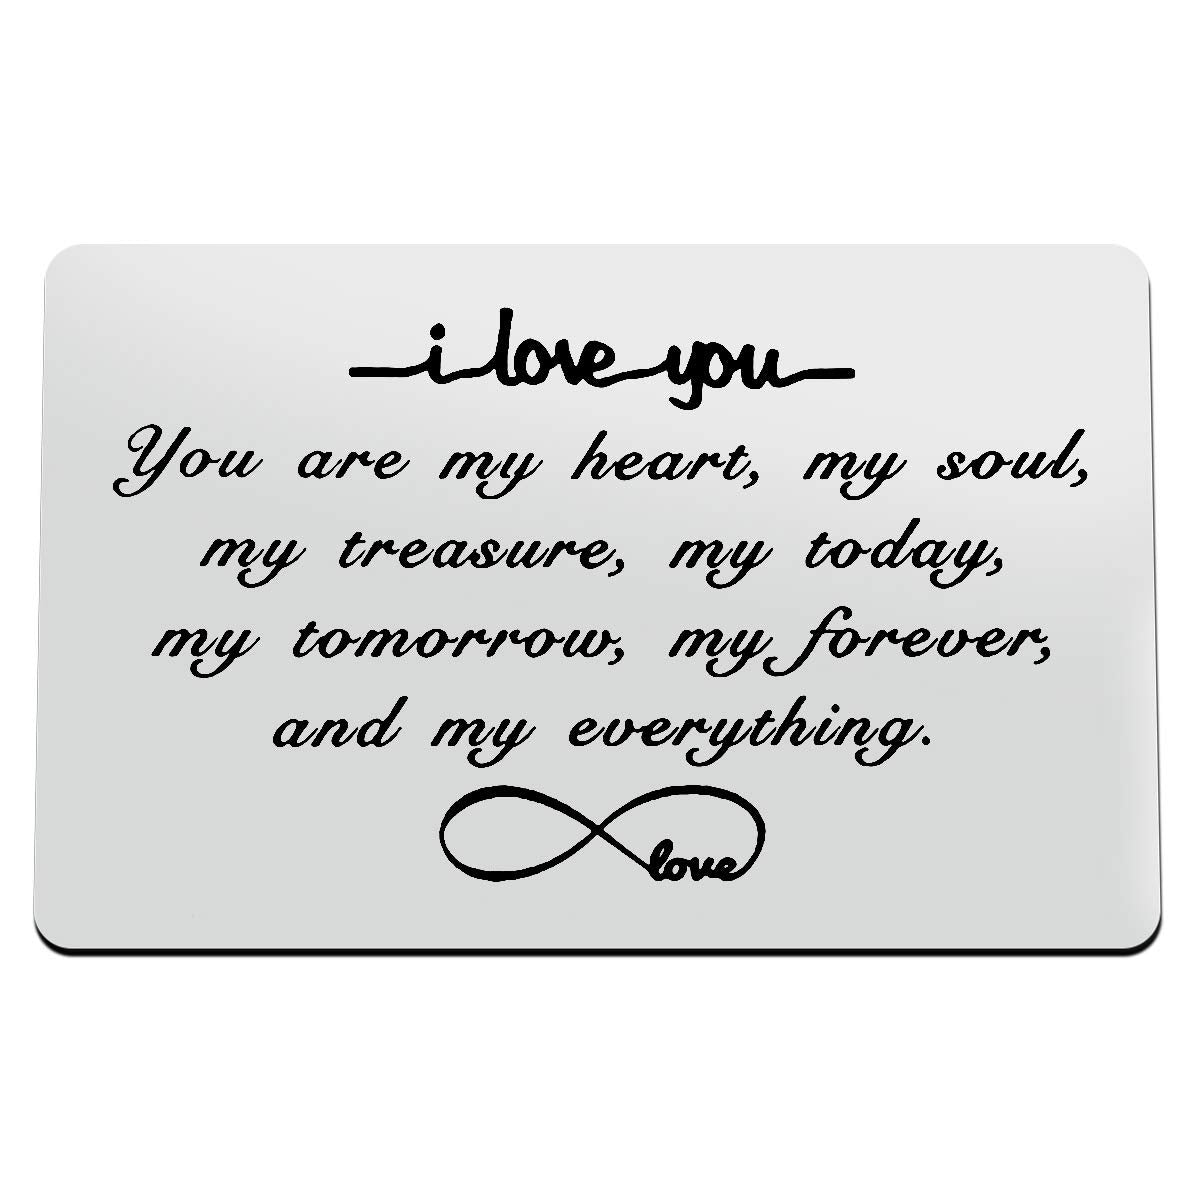 Engraved Wallet Insert Card Gifts Anniversary Card Gifts I Love You Forever Couples Gifts Soulmate Gifts for Him Her Birthday Gifts for Boyfriend Husband Valentines Gifts for Men Christmas Presents